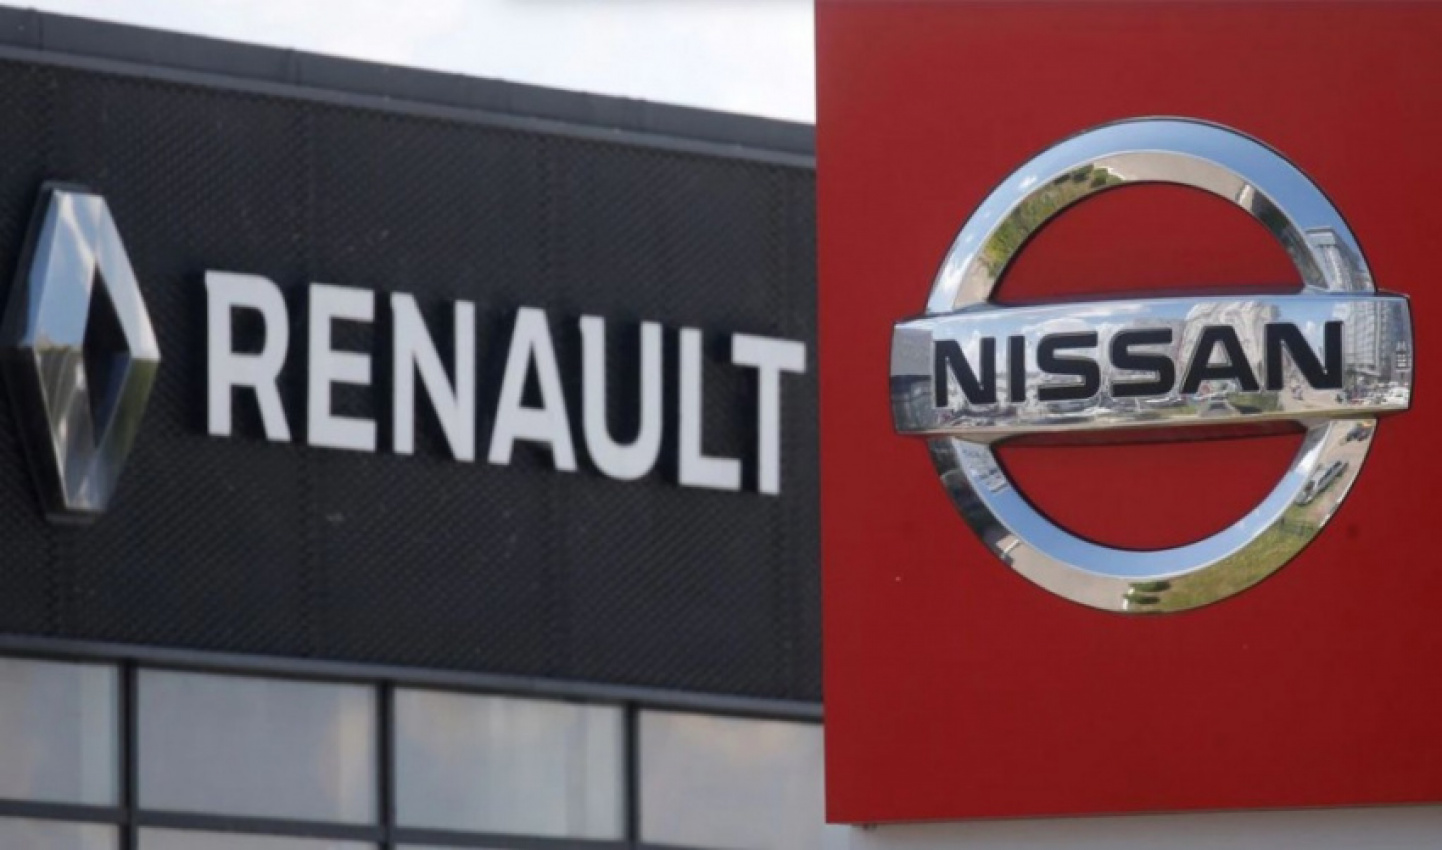 autos, cars, nissan, renault, autos nissan, renault-nissan ordered to pay additional wages, warns india unit could become 'unviable'